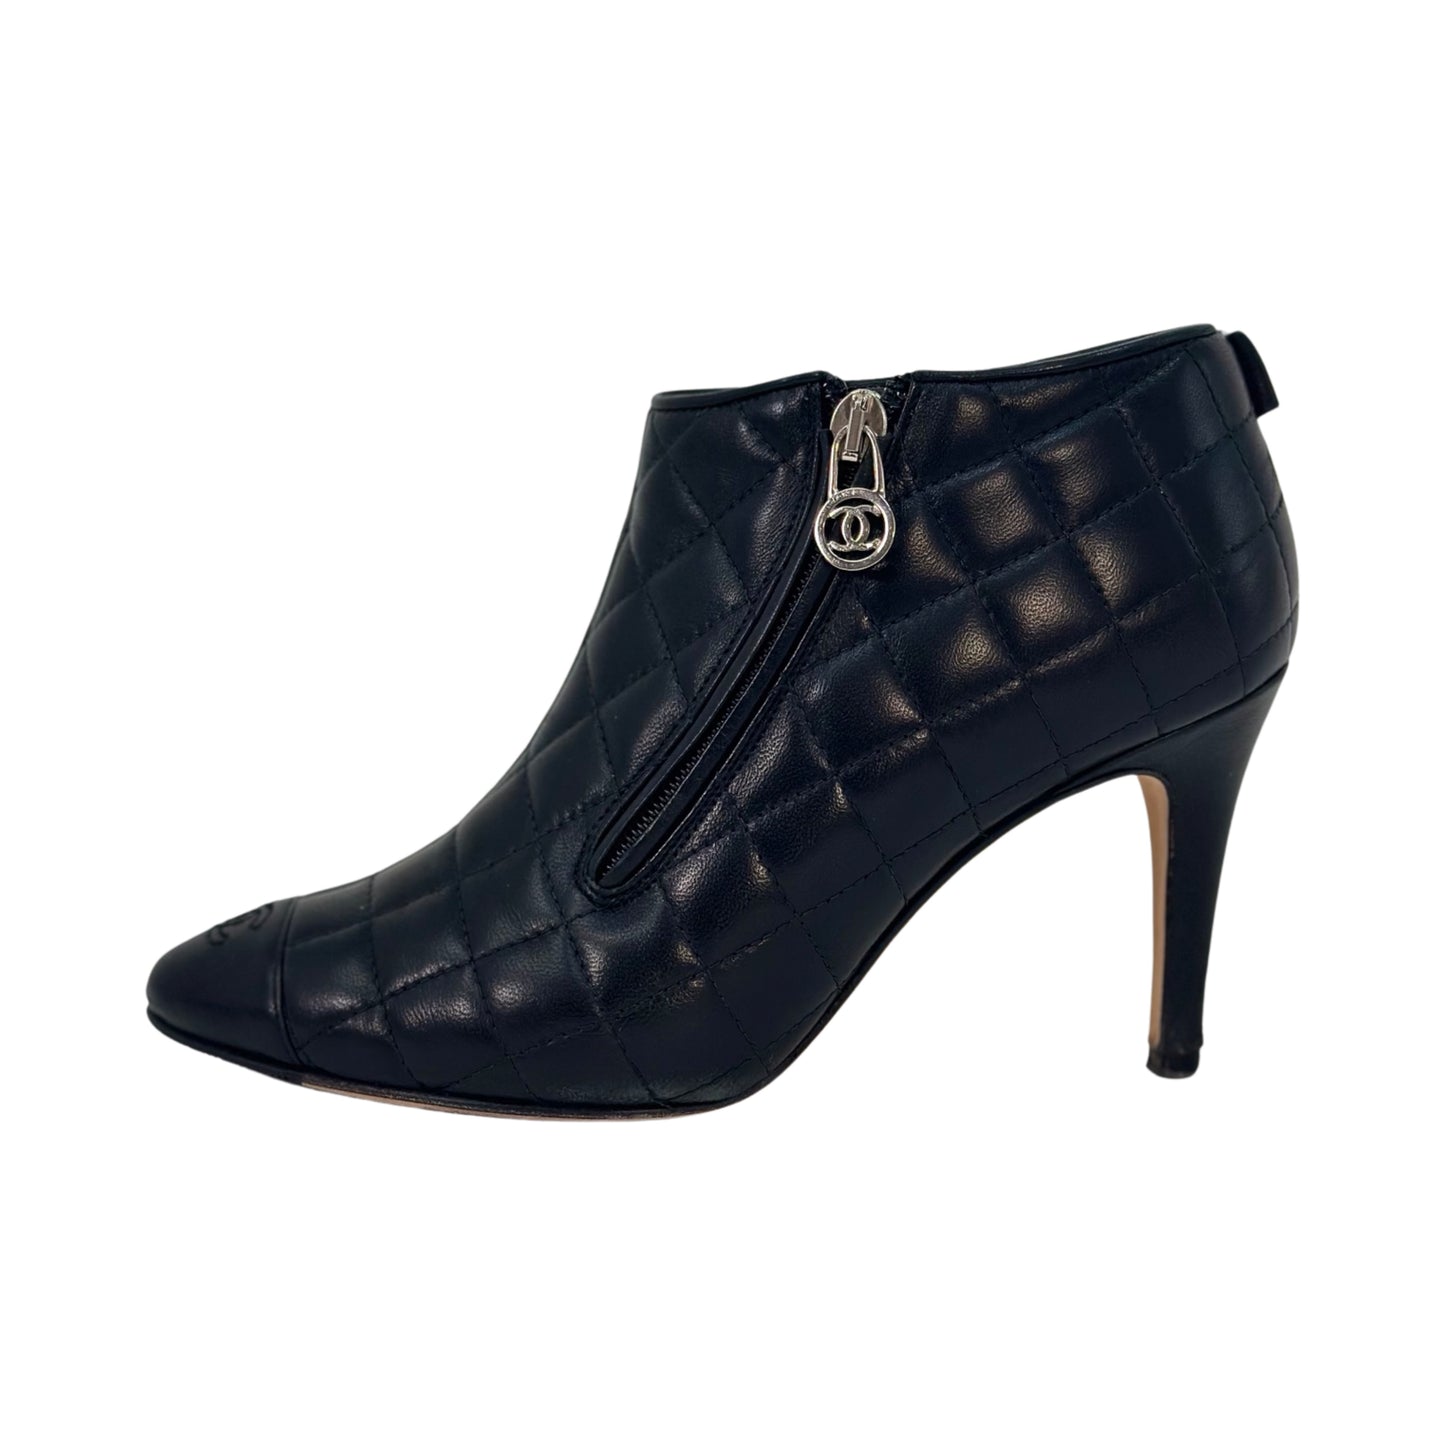 Chanel CC Toe Cap Quilted Ankle Booties - Size 37.5 FR